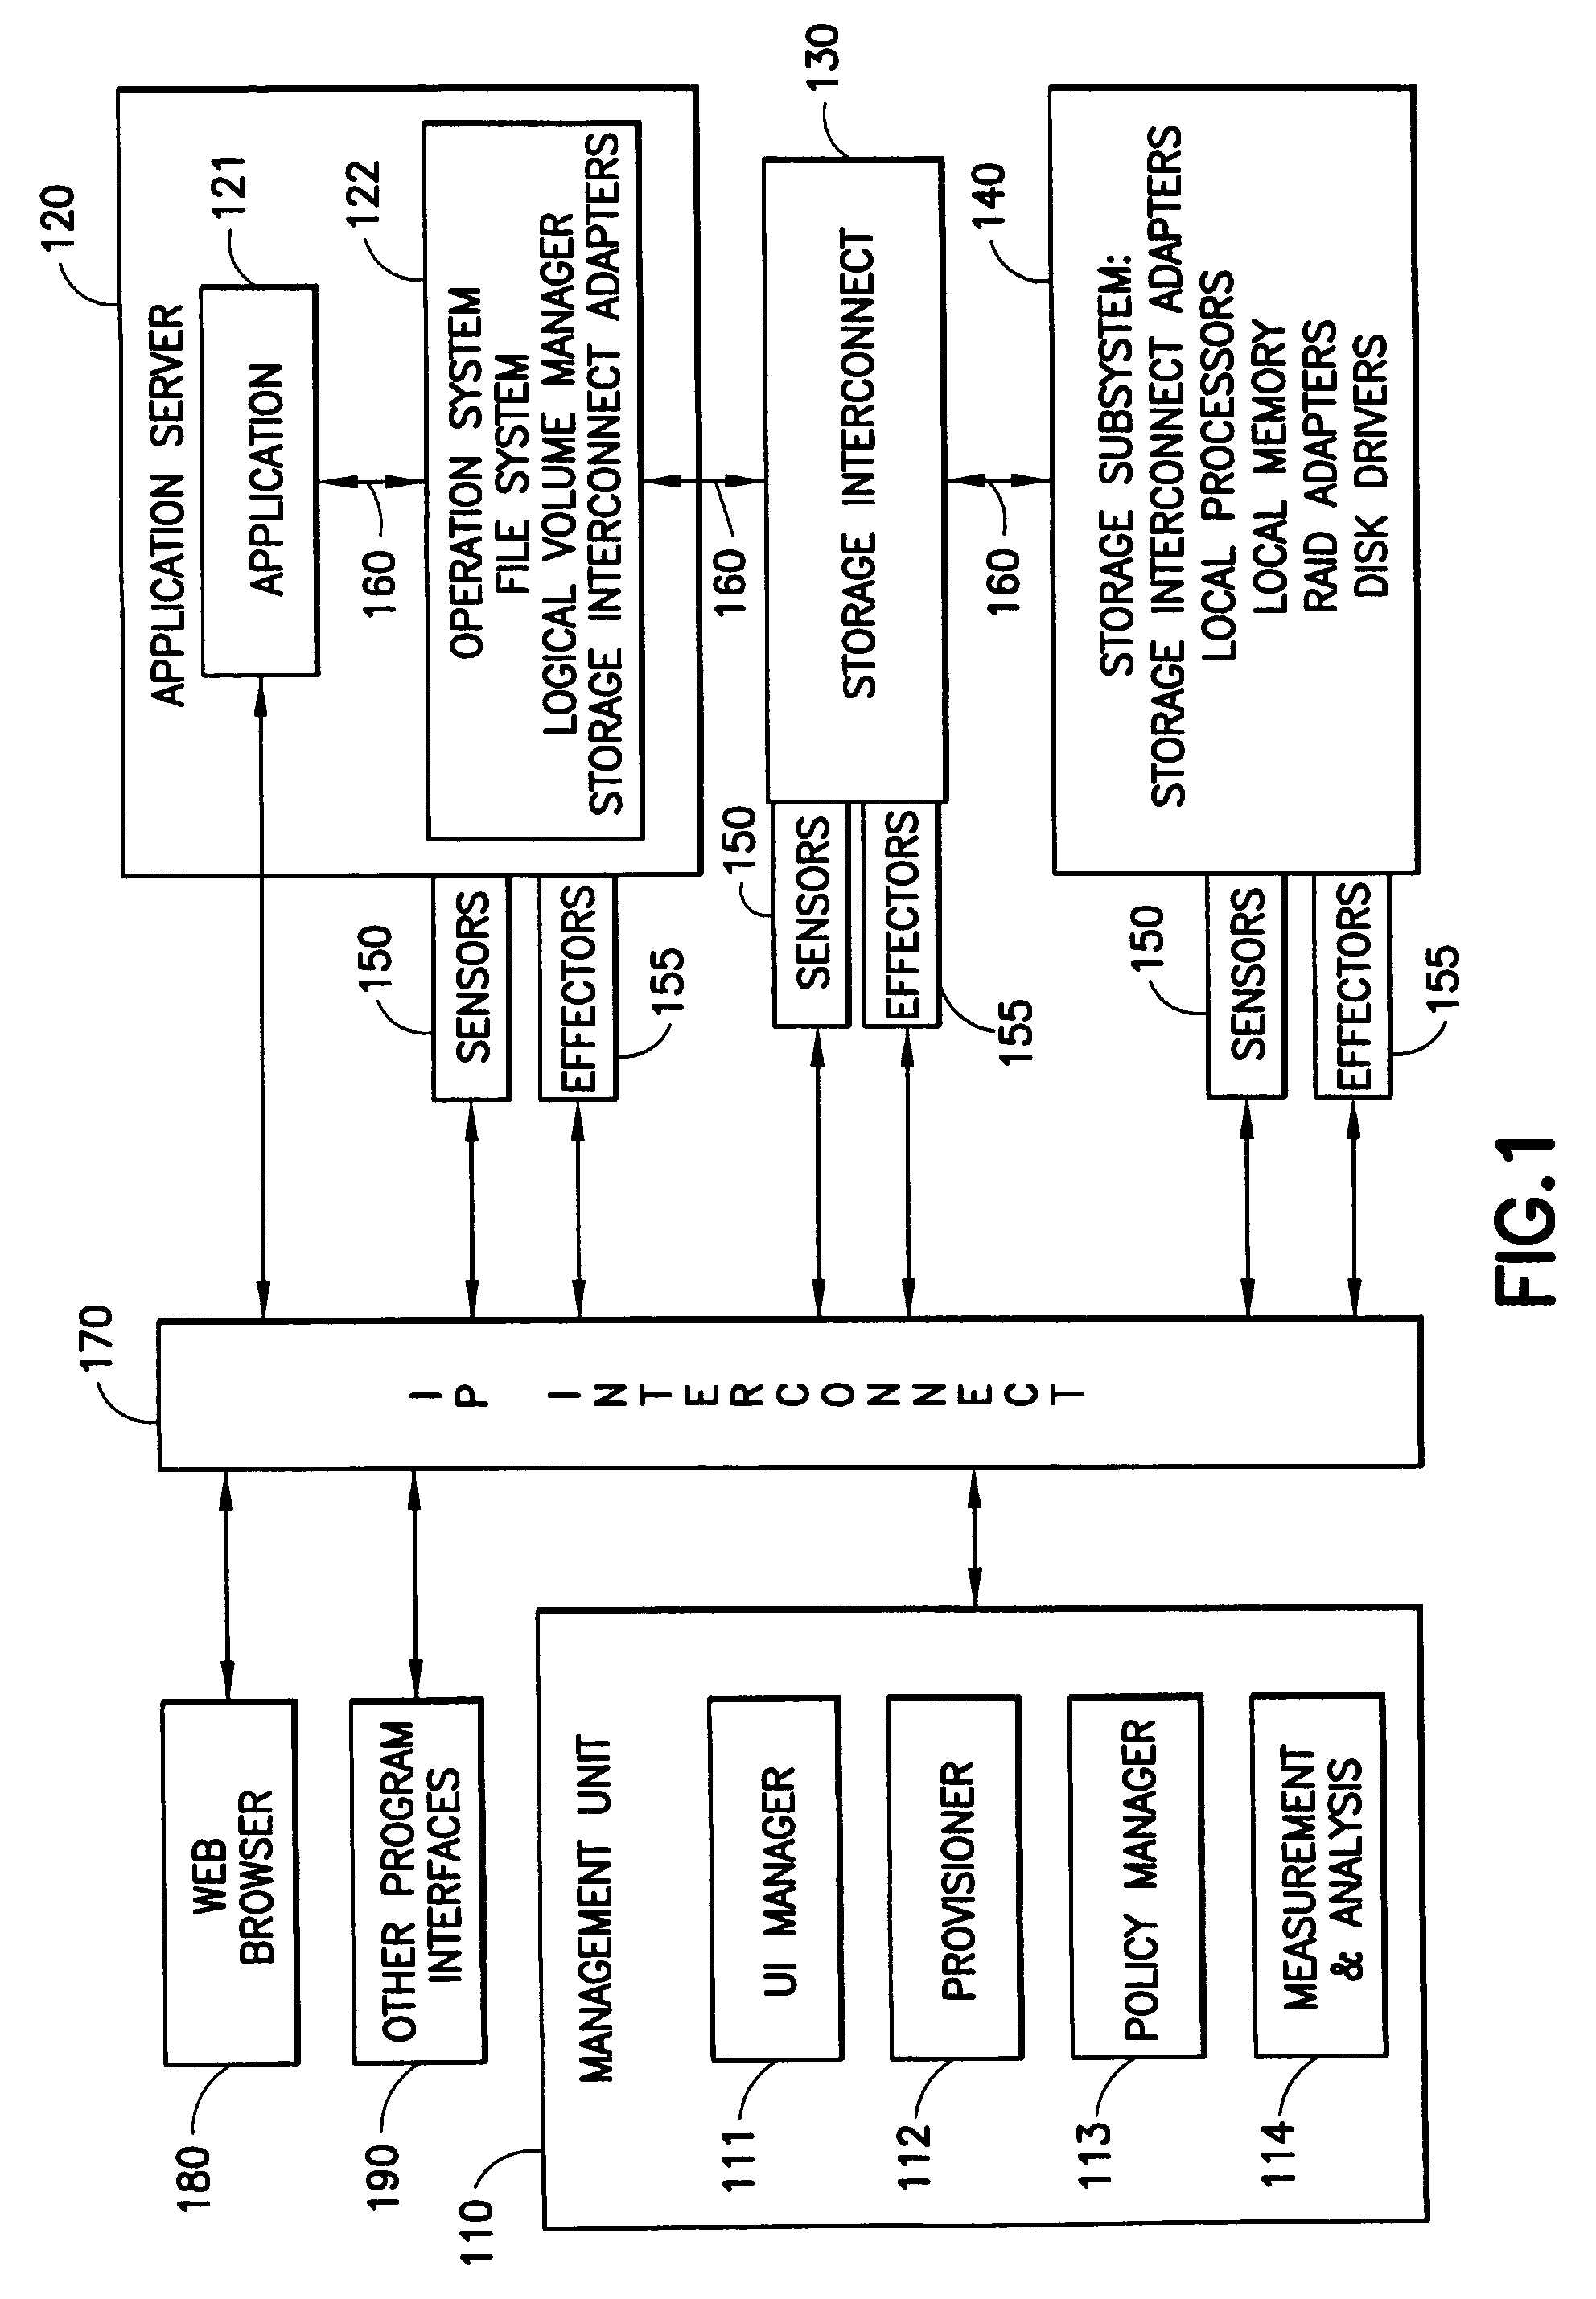 Method for policy-based, autonomically allocated storage